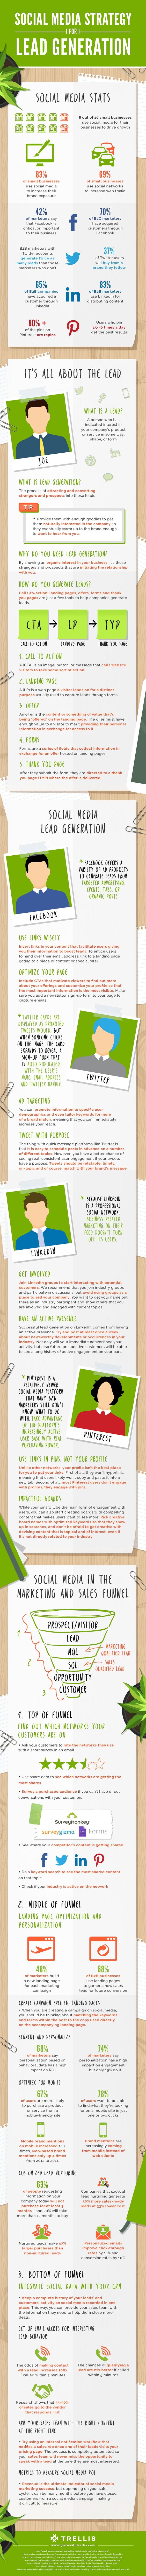 Infographic of the Week: Social Media Strategies For Lead Generation